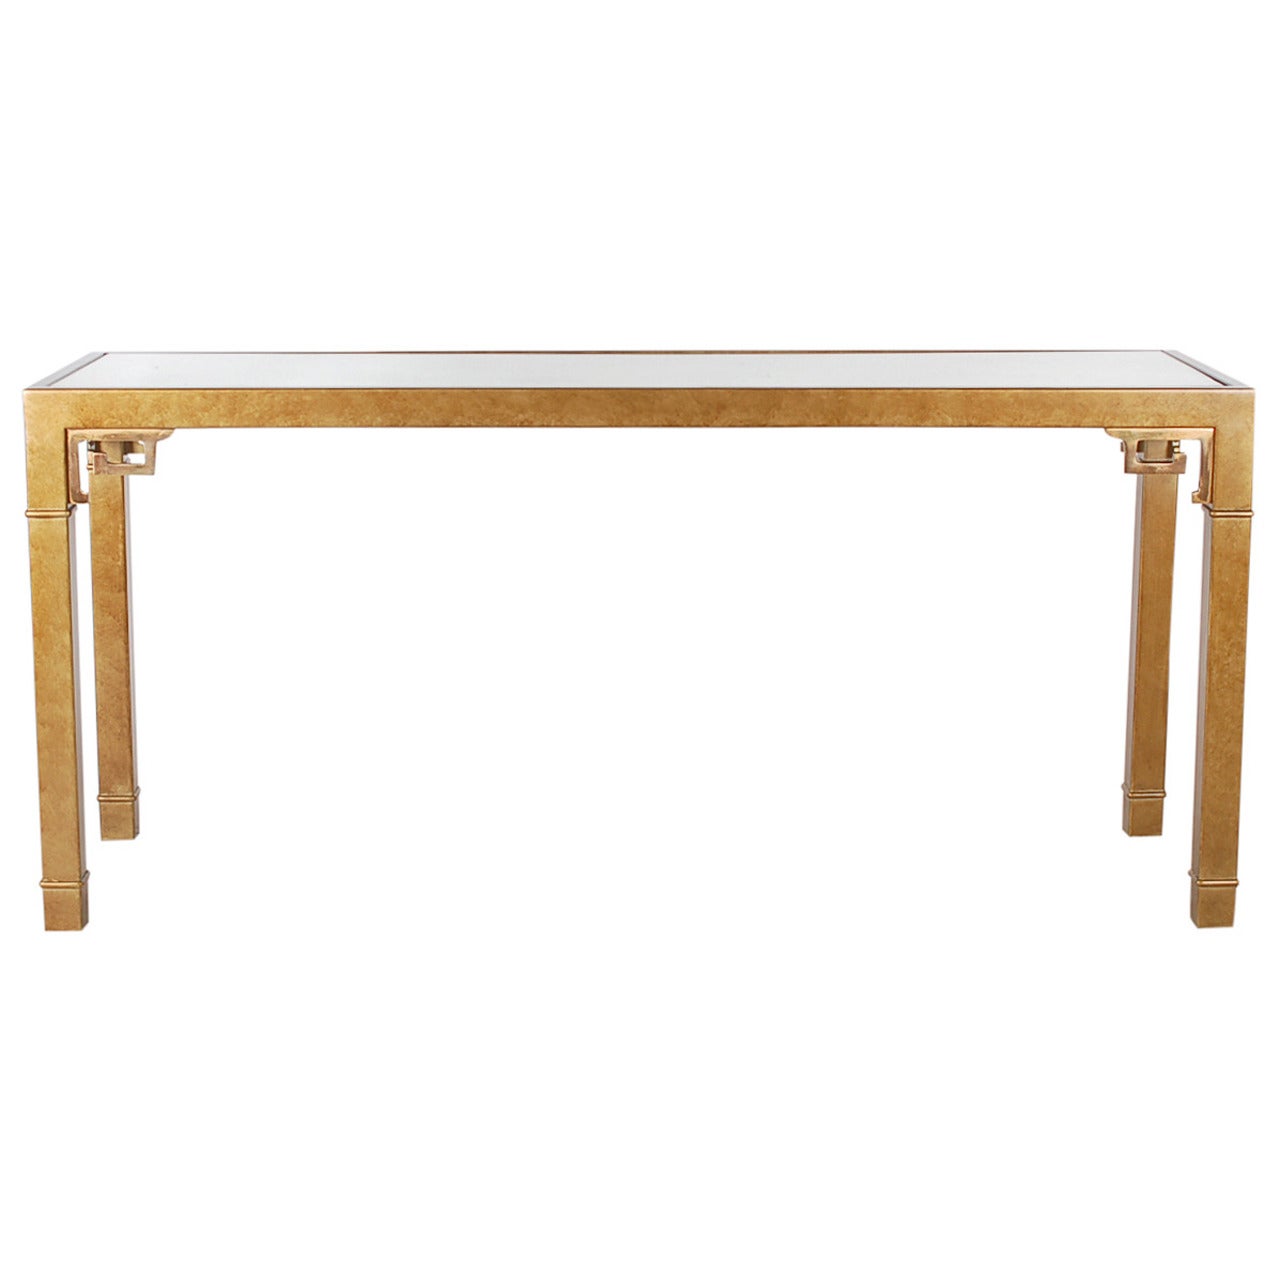 Asian Modern Patinated Brass Console Table by Mastercraft